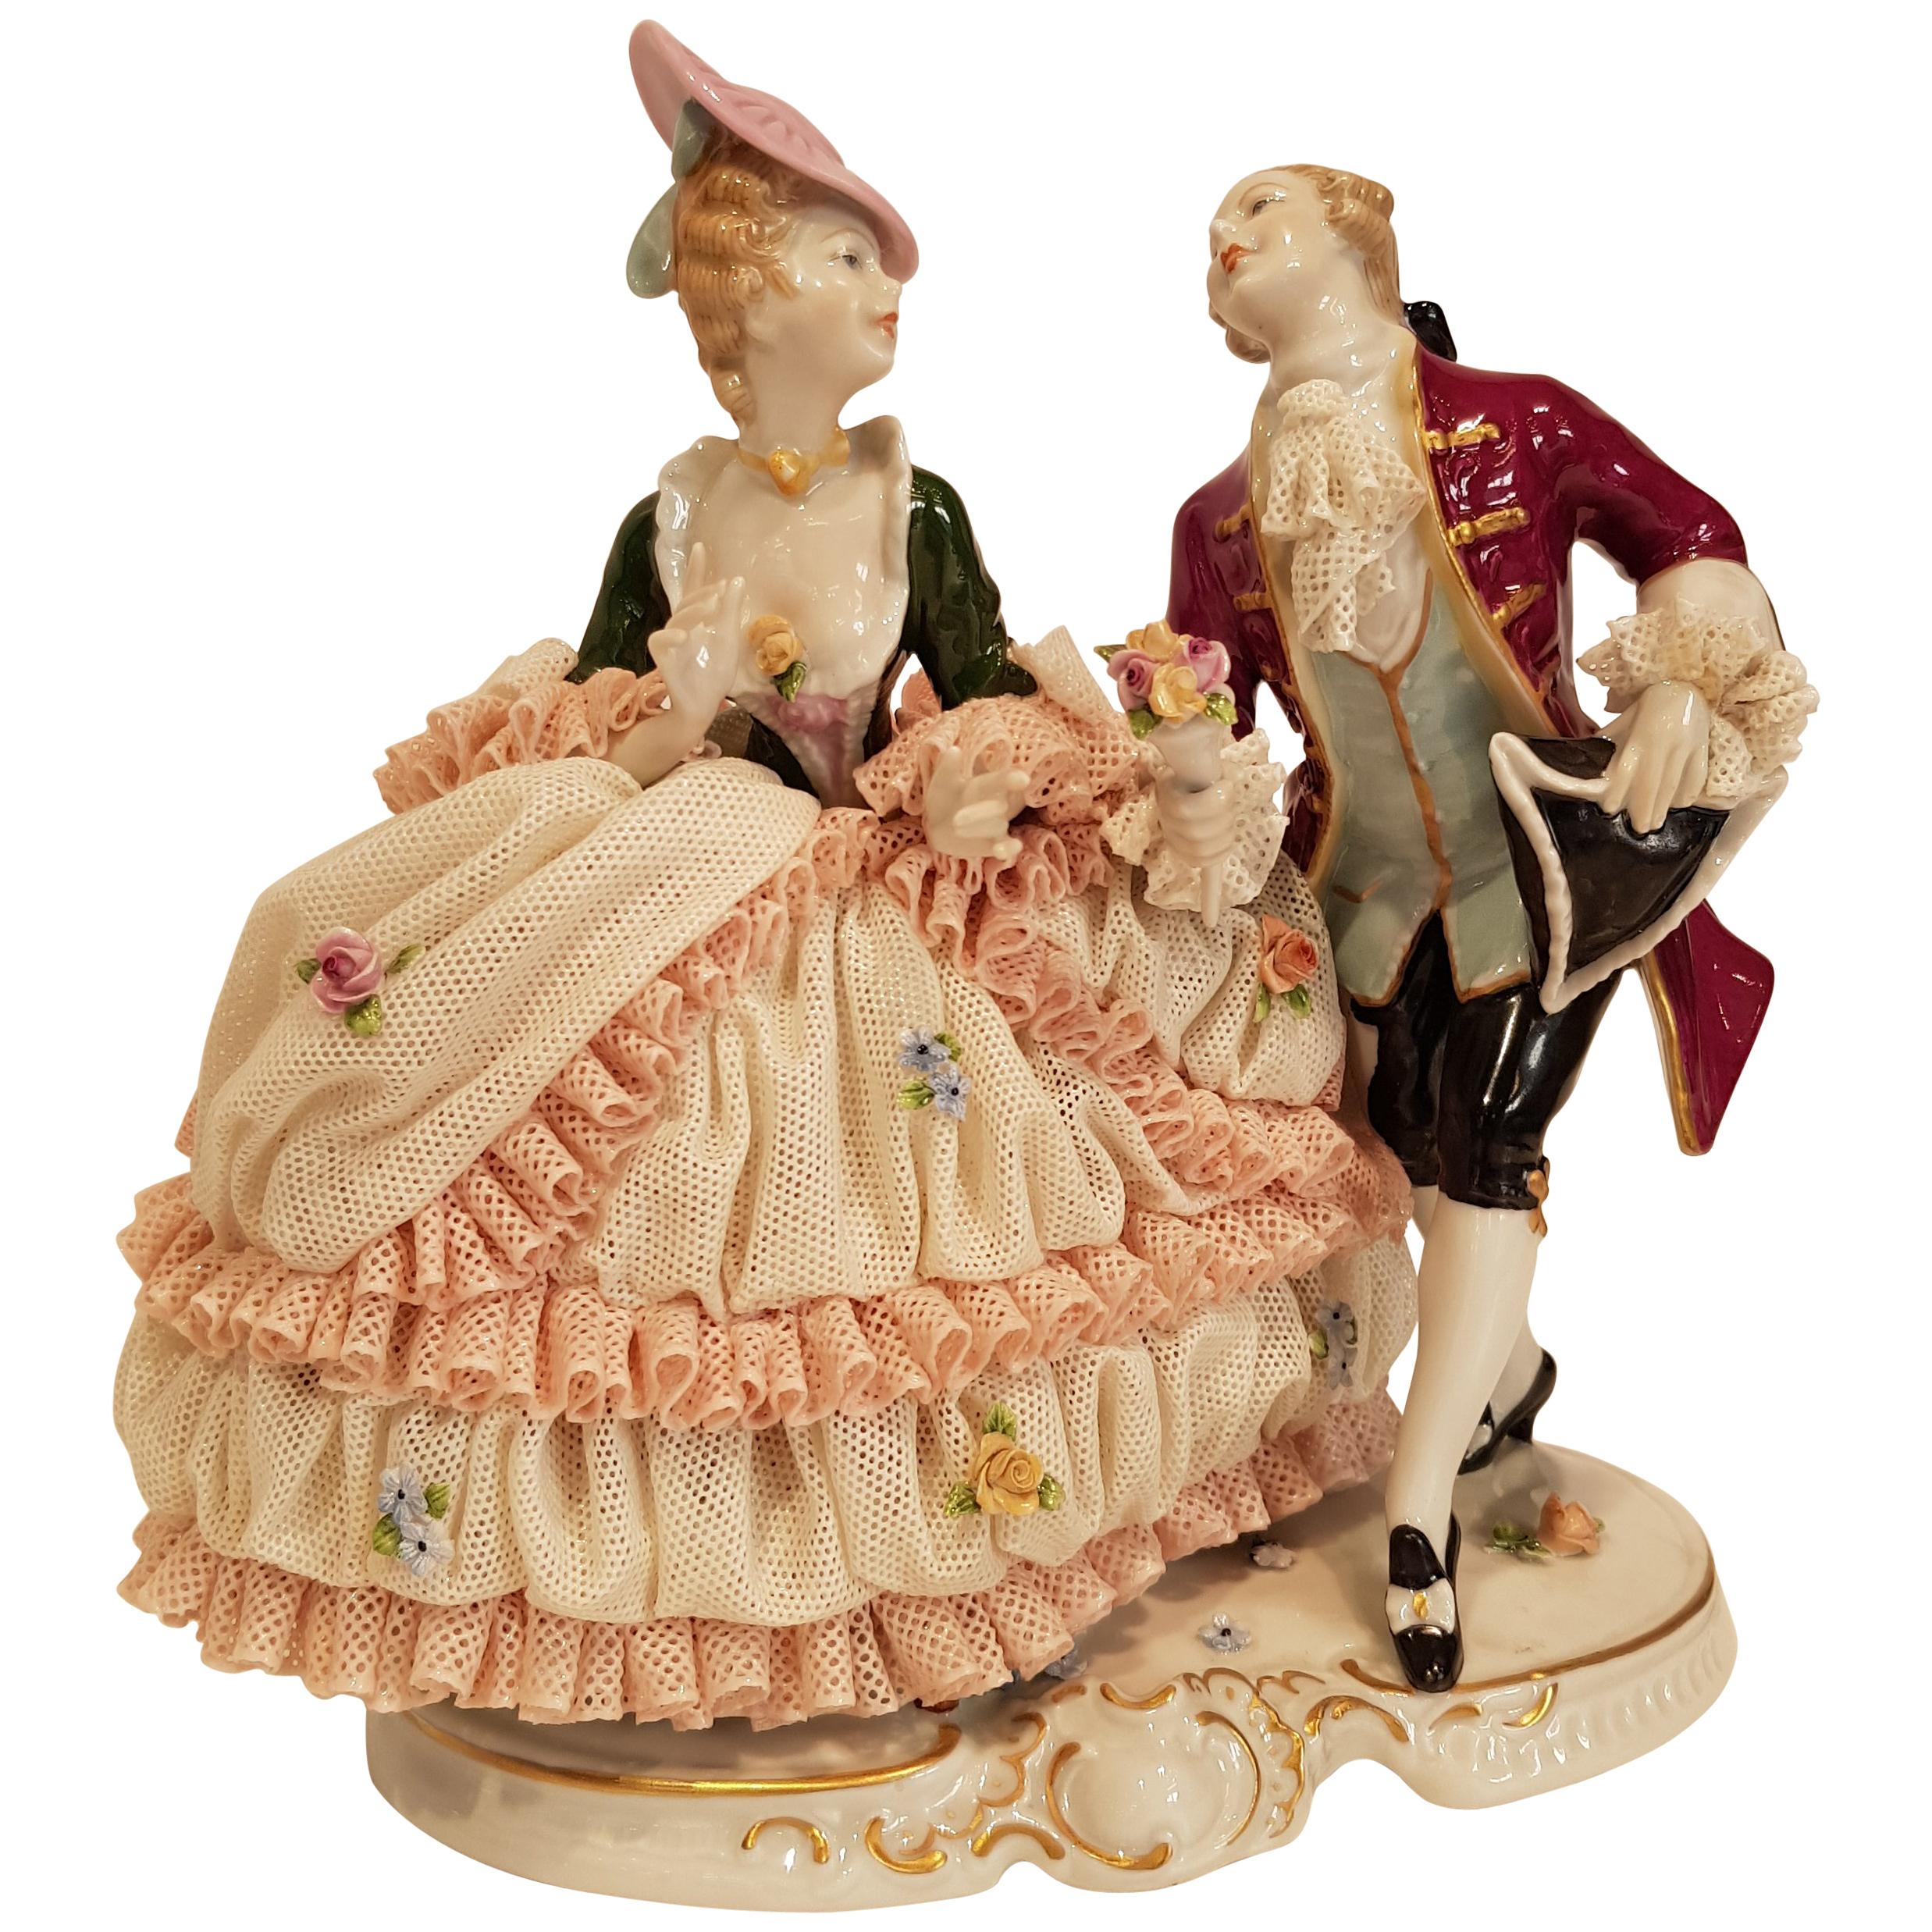 Original Unterweissbach Porcelain, Figures "Woman in lace and man" For Sale